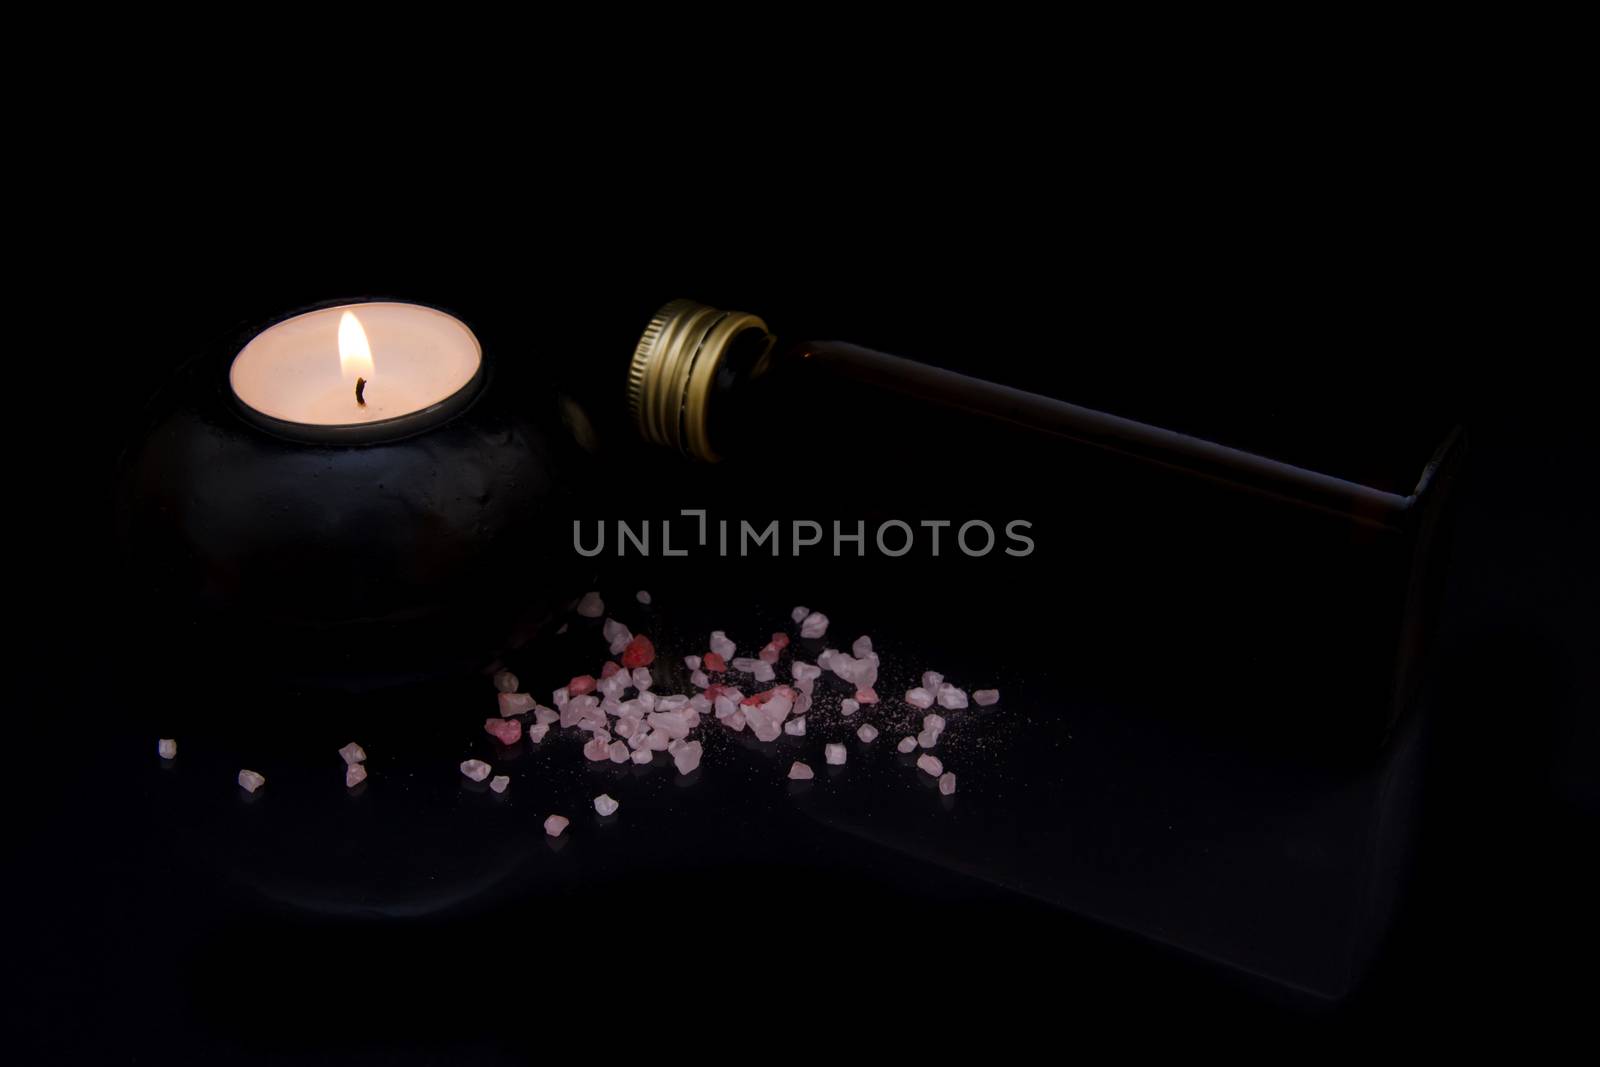 Candle with bath salts and oil on black background